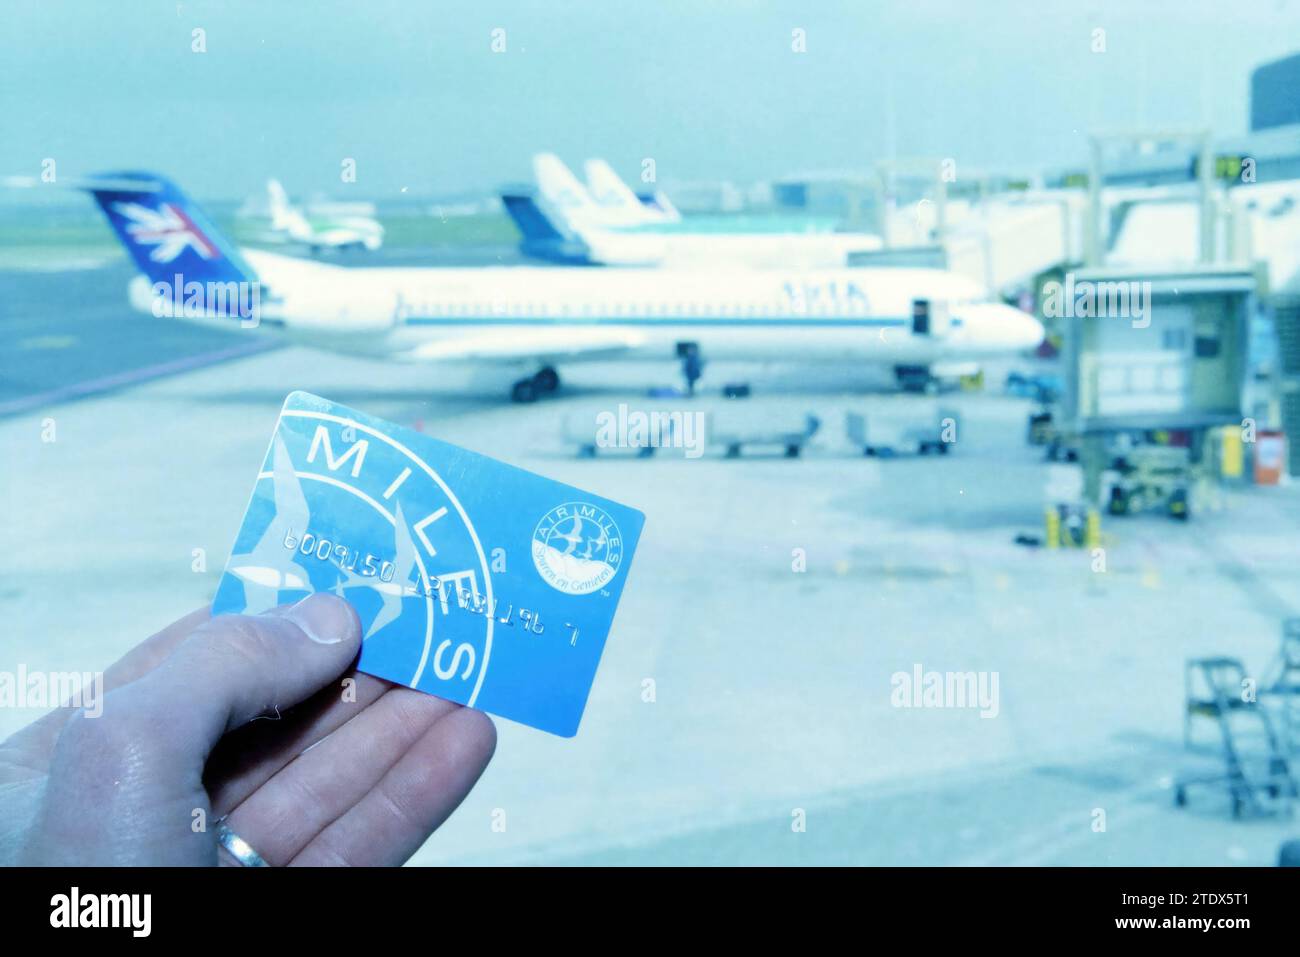 AirMiles card, Schiphol, Schiphol, 08-04-1998, Whizgle News from the Past, Tailored for the Future. Explore historical narratives, Dutch The Netherlands agency image with a modern perspective, bridging the gap between yesterday's events and tomorrow's insights. A timeless journey shaping the stories that shape our future. Stock Photo